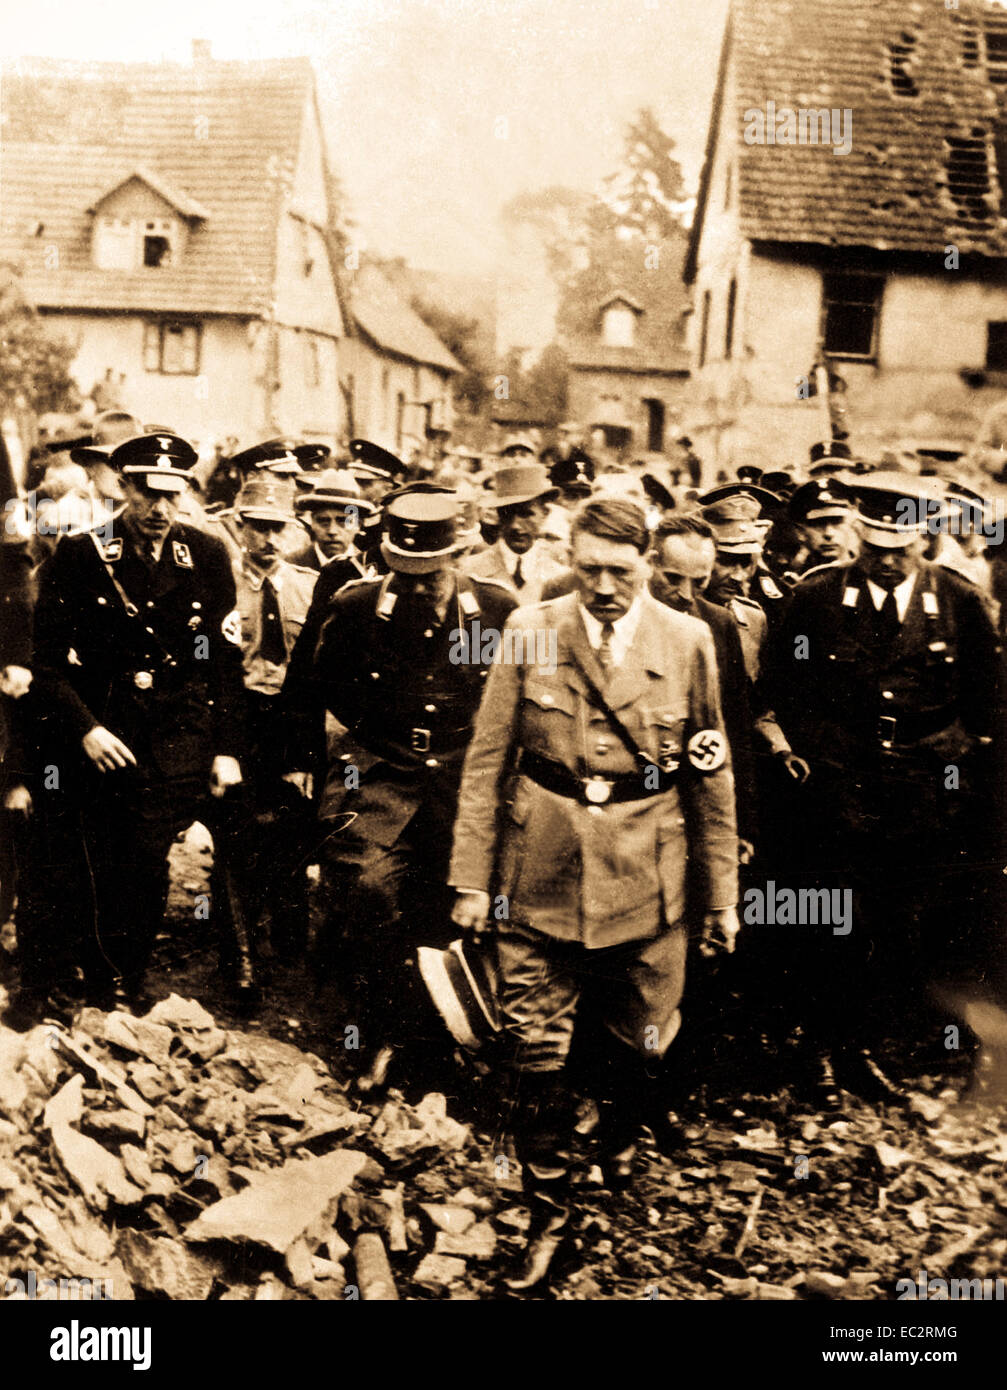 Adolf Hitler, accompanied by other German officials, grimly inspects bomb damage in a German city in 1944, in this German film captured by the U.S. Army Signal Corps on the western front. Ca. 1944.  (Army) Stock Photo